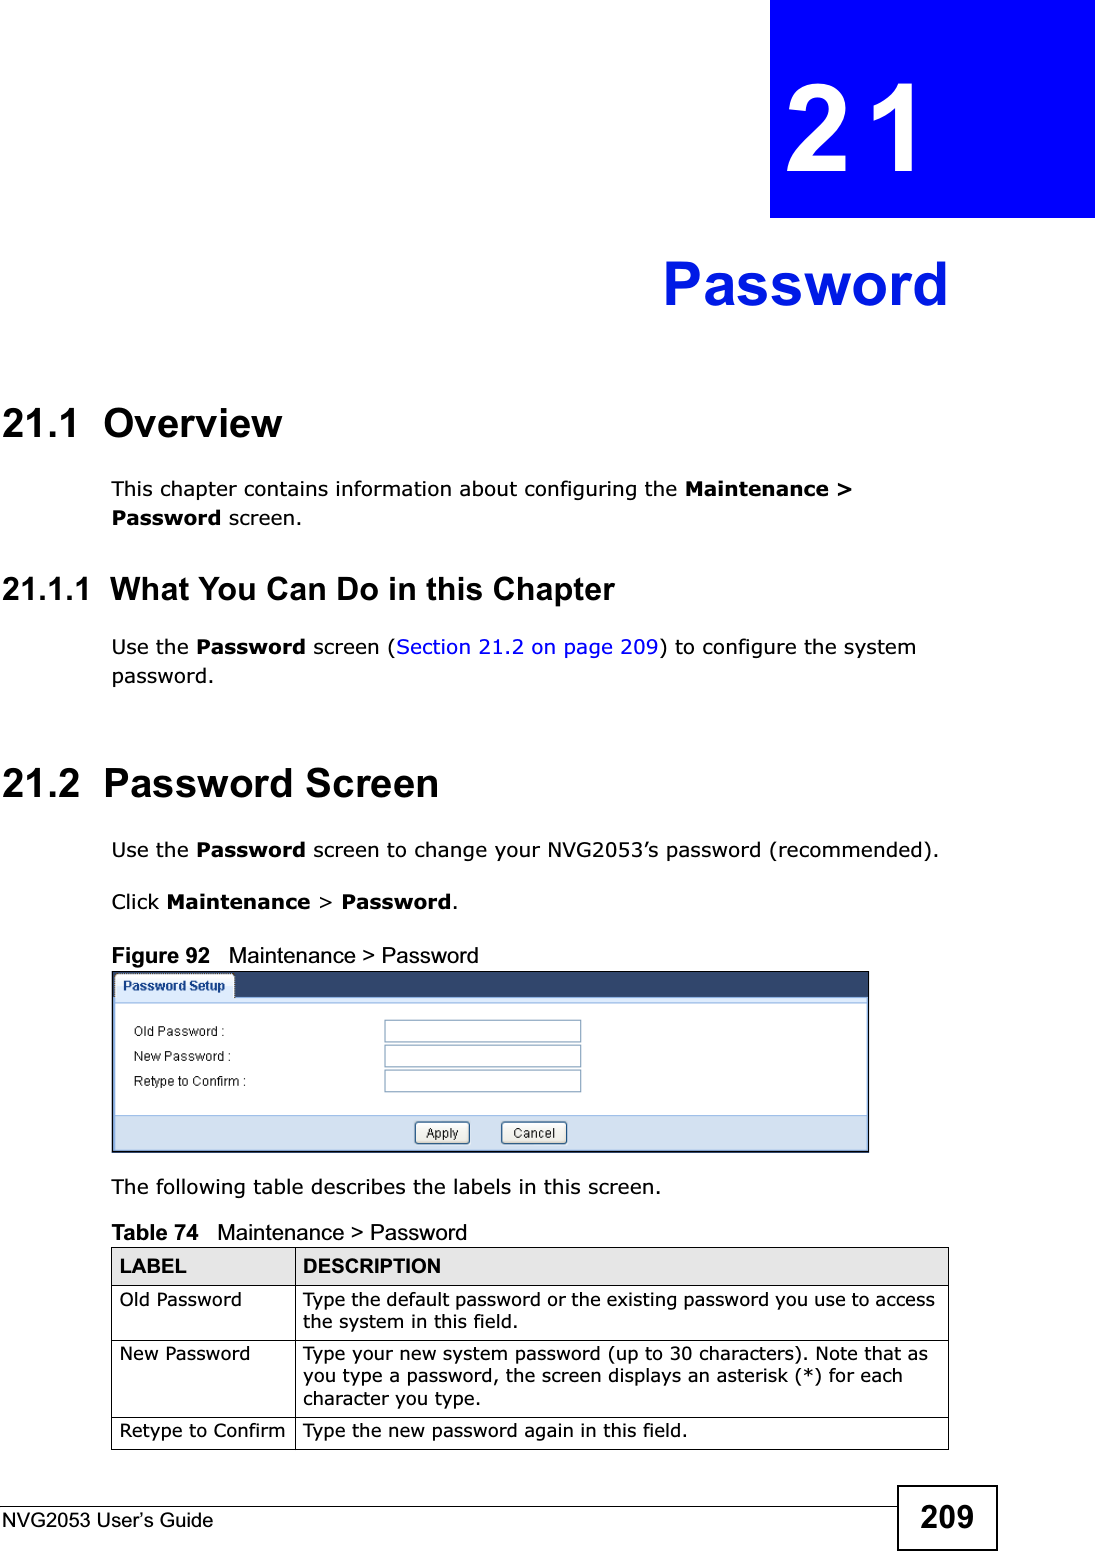 NVG2053 User’s Guide 209CHAPTER 21Password21.1  OverviewThis chapter contains information about configuring the Maintenance &gt; Password screen.21.1.1  What You Can Do in this ChapterUse the Password screen (Section 21.2 on page 209) to configure the system password.21.2  Password ScreenUse the Password screen to change your NVG2053’s password (recommended). Click Maintenance &gt; Password.Figure 92   Maintenance &gt; Password The following table describes the labels in this screen.Table 74   Maintenance &gt; PasswordLABEL DESCRIPTIONOld Password Type the default password or the existing password you use to access the system in this field.New Password Type your new system password (up to 30 characters). Note that as you type a password, the screen displays an asterisk (*) for each character you type.Retype to Confirm Type the new password again in this field.